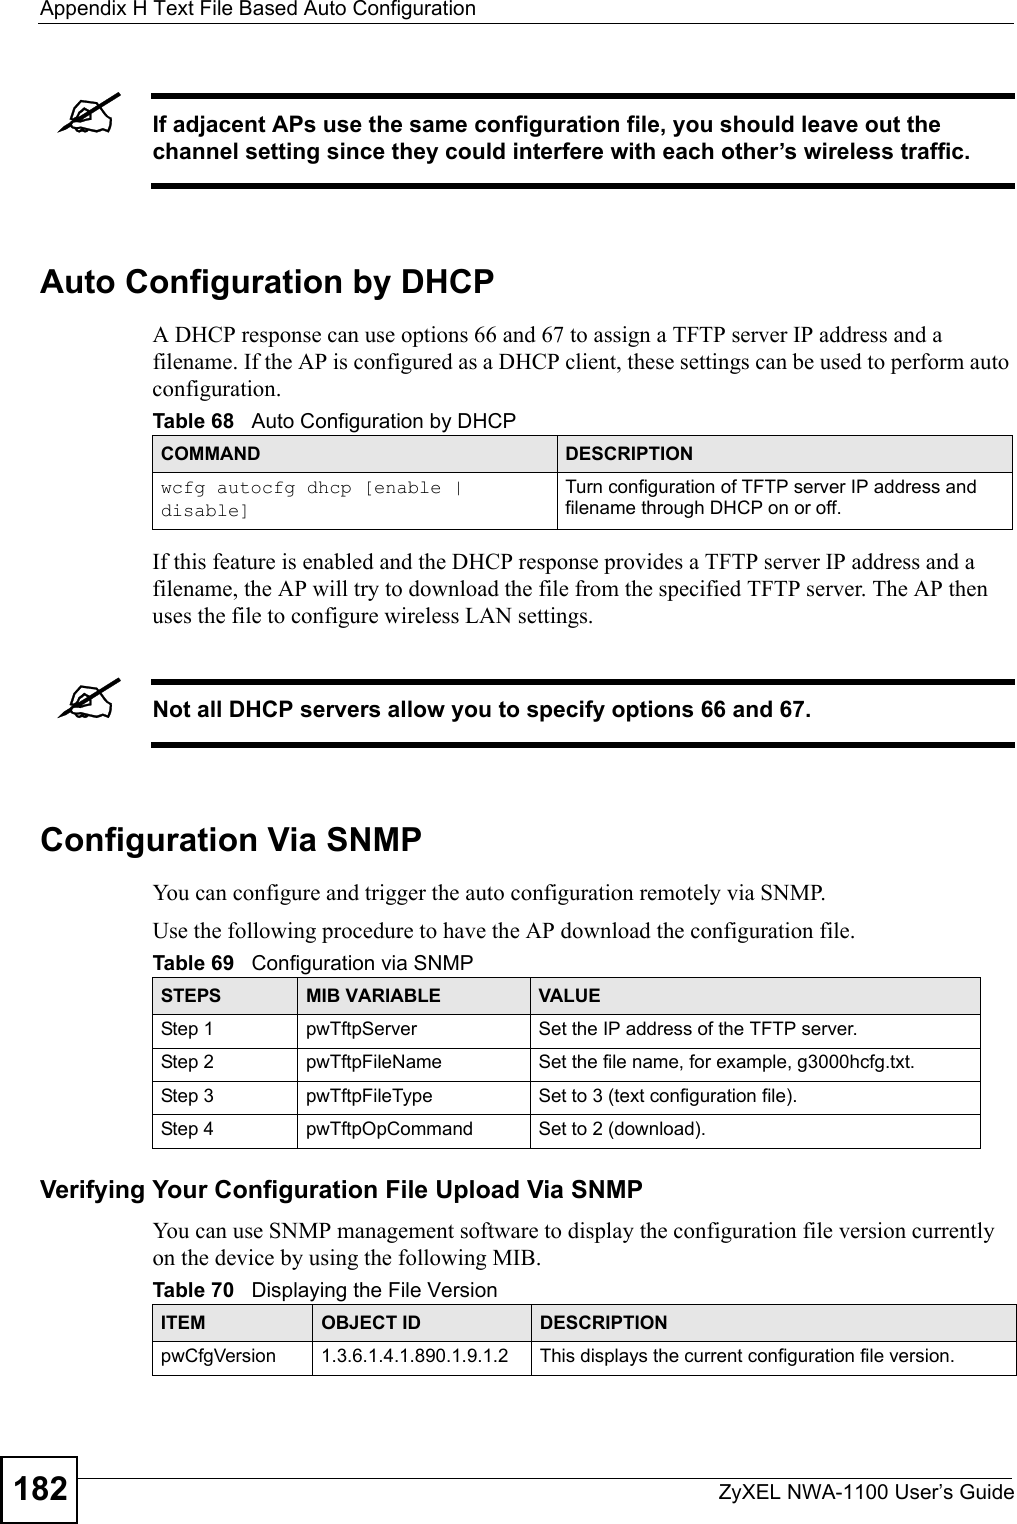 Appendix H Text File Based Auto ConfigurationZyXEL NWA-1100 User’s Guide182&quot;If adjacent APs use the same configuration file, you should leave out the channel setting since they could interfere with each other’s wireless traffic.Auto Configuration by DHCPA DHCP response can use options 66 and 67 to assign a TFTP server IP address and a filename. If the AP is configured as a DHCP client, these settings can be used to perform auto configuration.   If this feature is enabled and the DHCP response provides a TFTP server IP address and a filename, the AP will try to download the file from the specified TFTP server. The AP then uses the file to configure wireless LAN settings.&quot;Not all DHCP servers allow you to specify options 66 and 67. Configuration Via SNMPYou can configure and trigger the auto configuration remotely via SNMP.Use the following procedure to have the AP download the configuration file.Verifying Your Configuration File Upload Via SNMPYou can use SNMP management software to display the configuration file version currently on the device by using the following MIB.Table 68   Auto Configuration by DHCPCOMMAND DESCRIPTIONwcfg autocfg dhcp [enable | disable]Turn configuration of TFTP server IP address and filename through DHCP on or off.Table 69   Configuration via SNMPSTEPS MIB VARIABLE VALUEStep 1 pwTftpServer Set the IP address of the TFTP server.Step 2 pwTftpFileName Set the file name, for example, g3000hcfg.txt.Step 3 pwTftpFileType Set to 3 (text configuration file).Step 4 pwTftpOpCommand Set to 2 (download).Table 70   Displaying the File VersionITEM OBJECT ID DESCRIPTIONpwCfgVersion 1.3.6.1.4.1.890.1.9.1.2 This displays the current configuration file version.